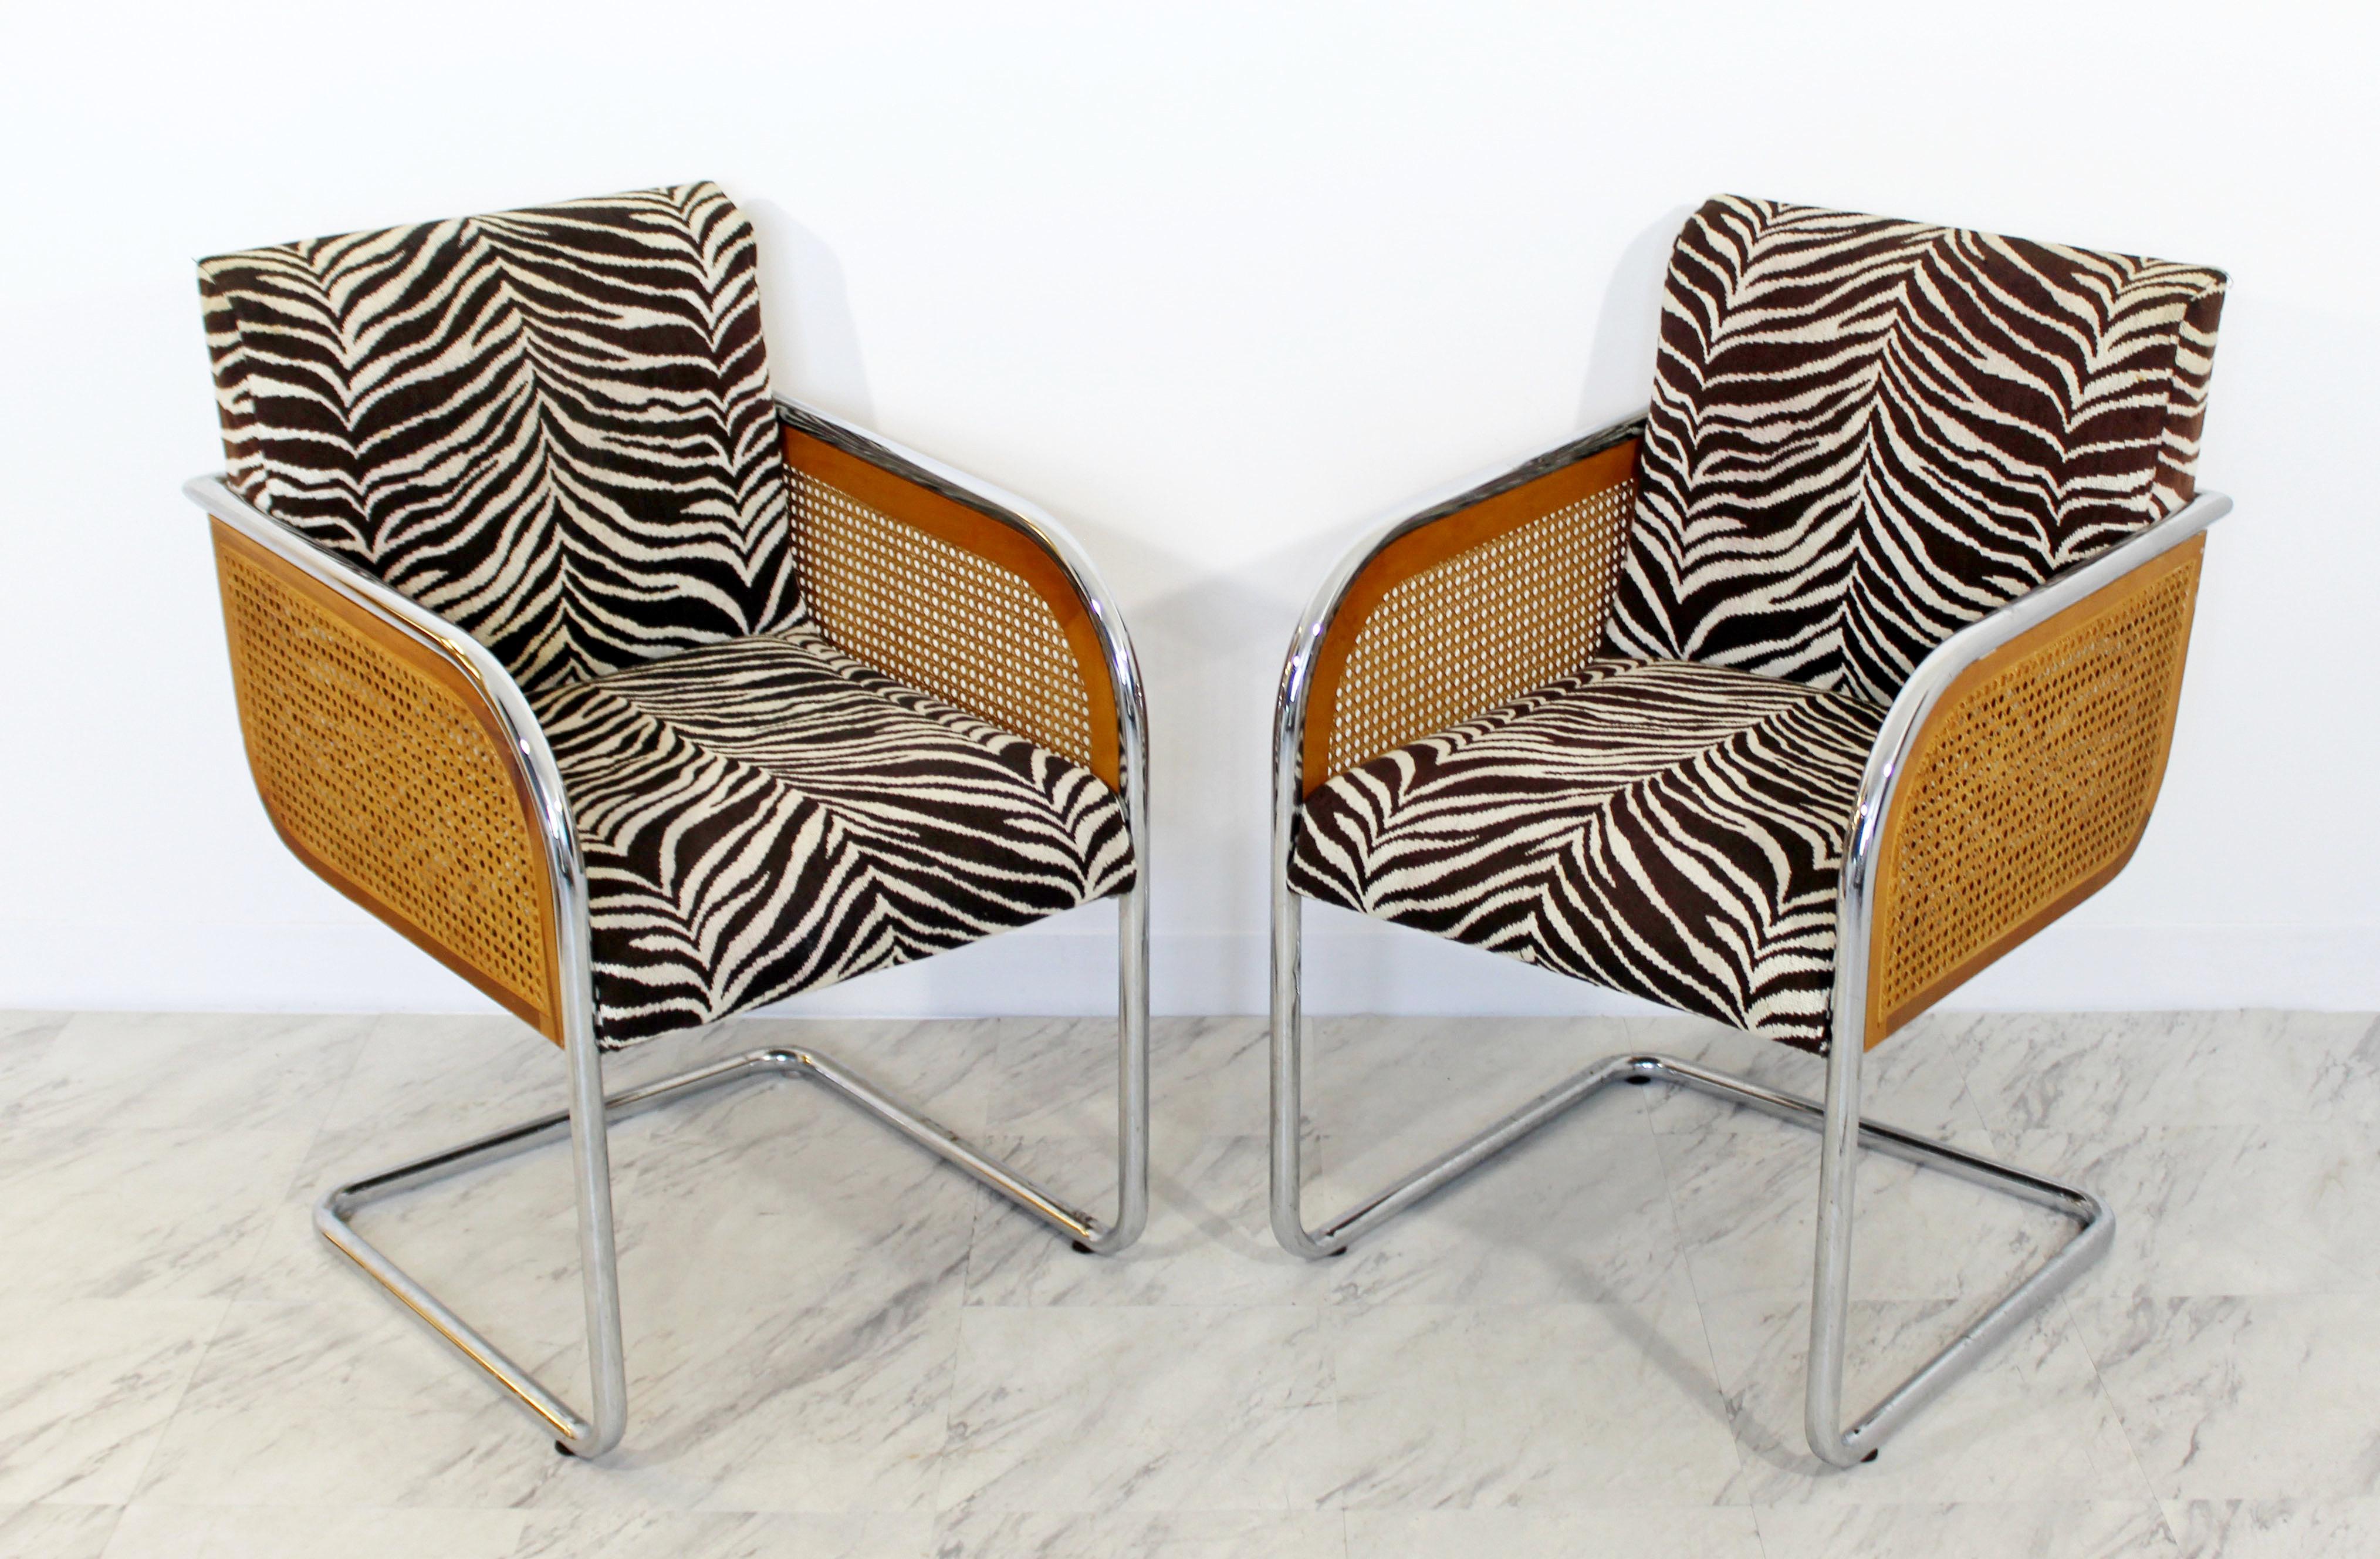 For your consideration is a gorgeous pair of chrome and rattan, cantilever armchairs, with a zebra striped upholstery, in the style of Marcel Breuer or Milo Baughman, circa the 1970s. In excellent condition. The dimensions are 21